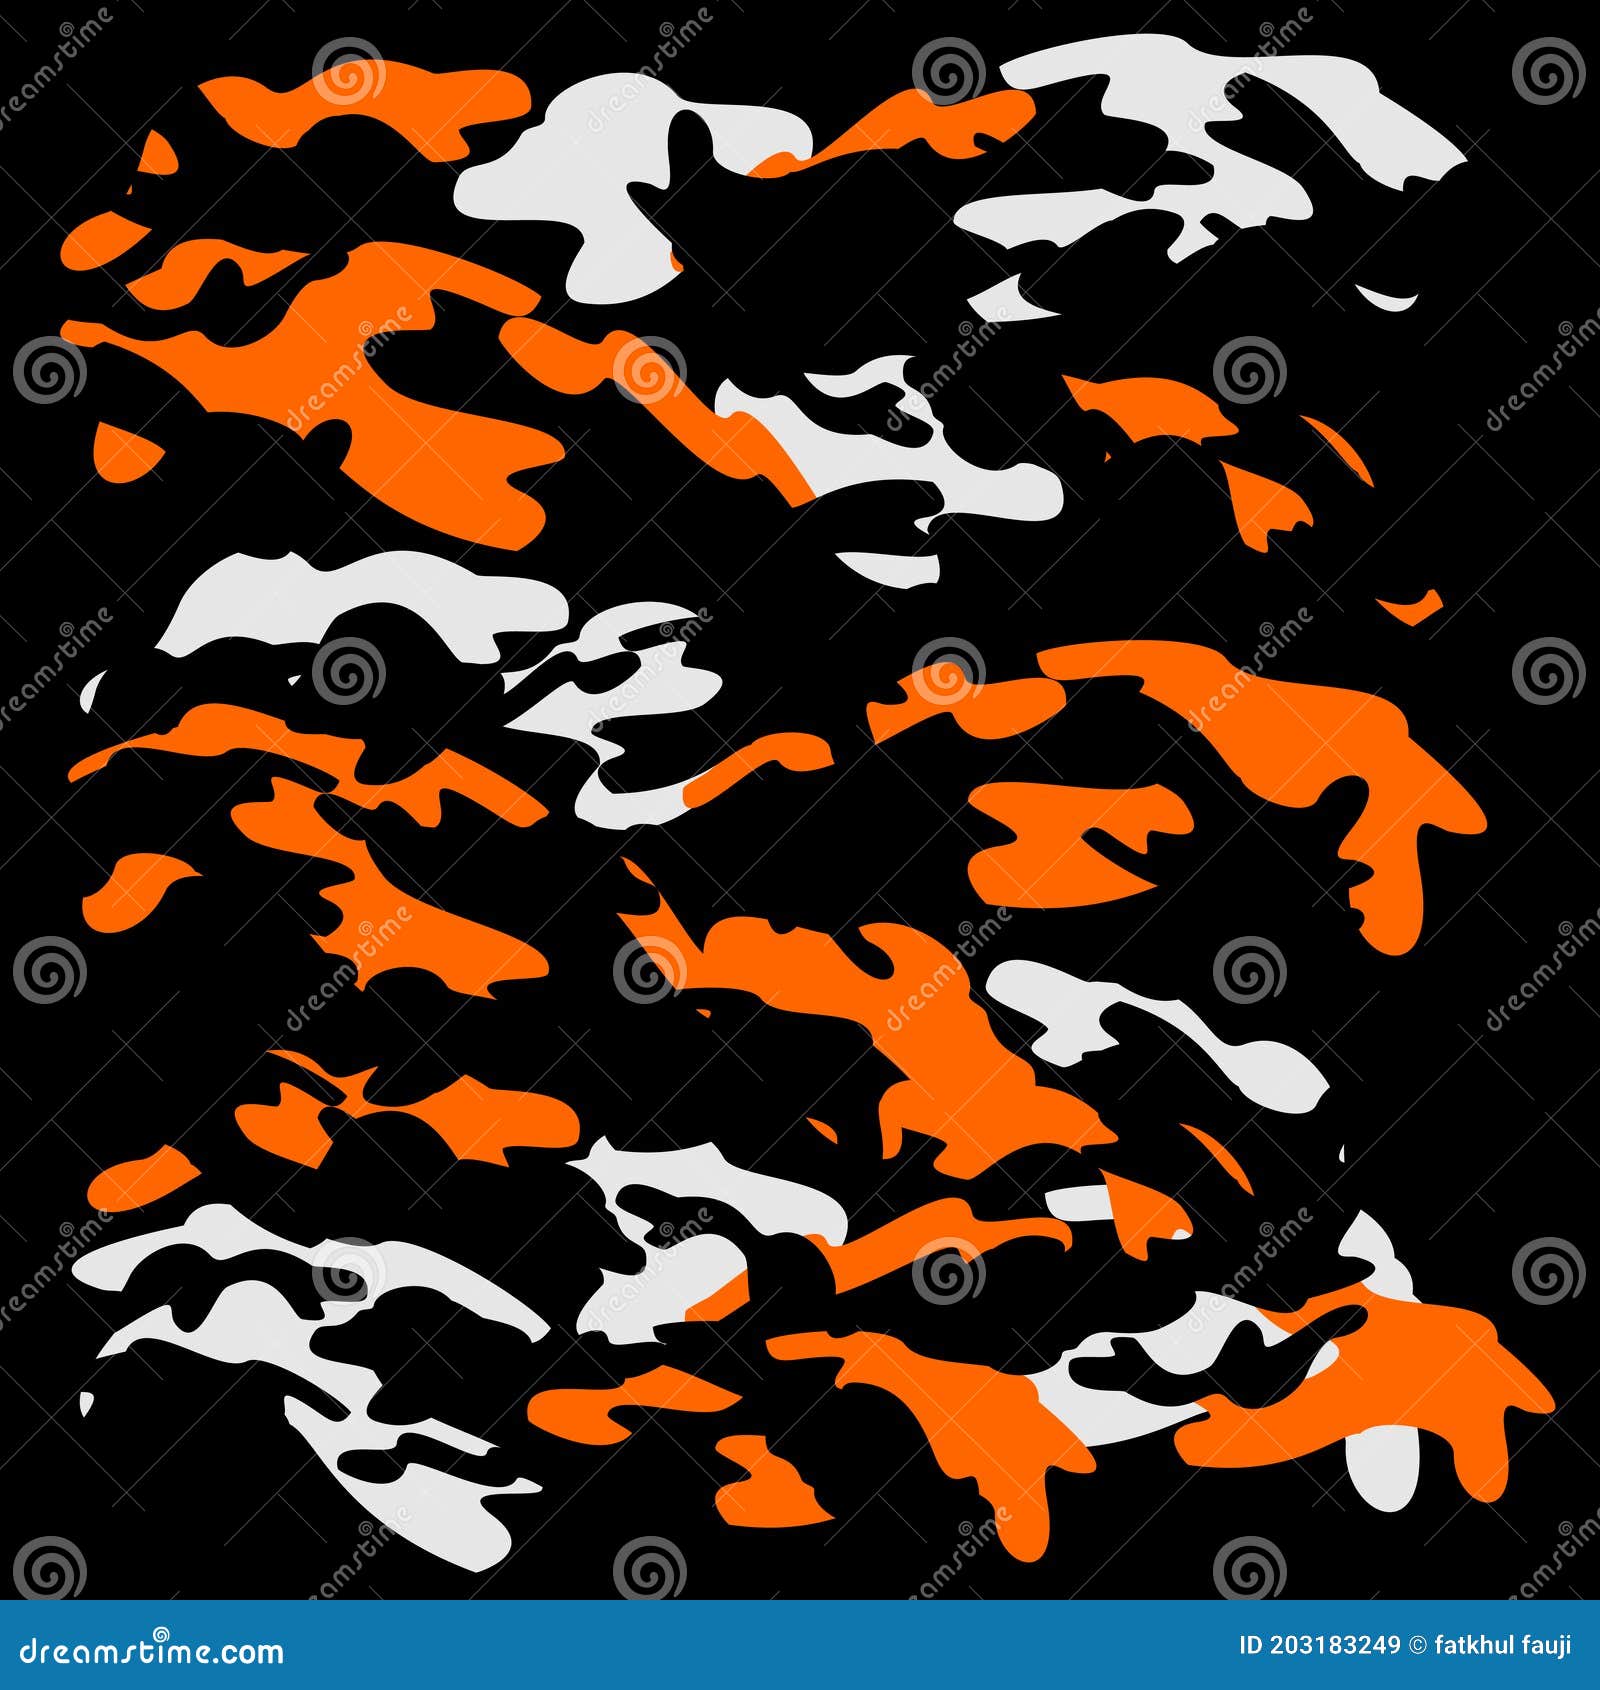 Army Camouflage Seamless Pattern, Orange and White on the Black